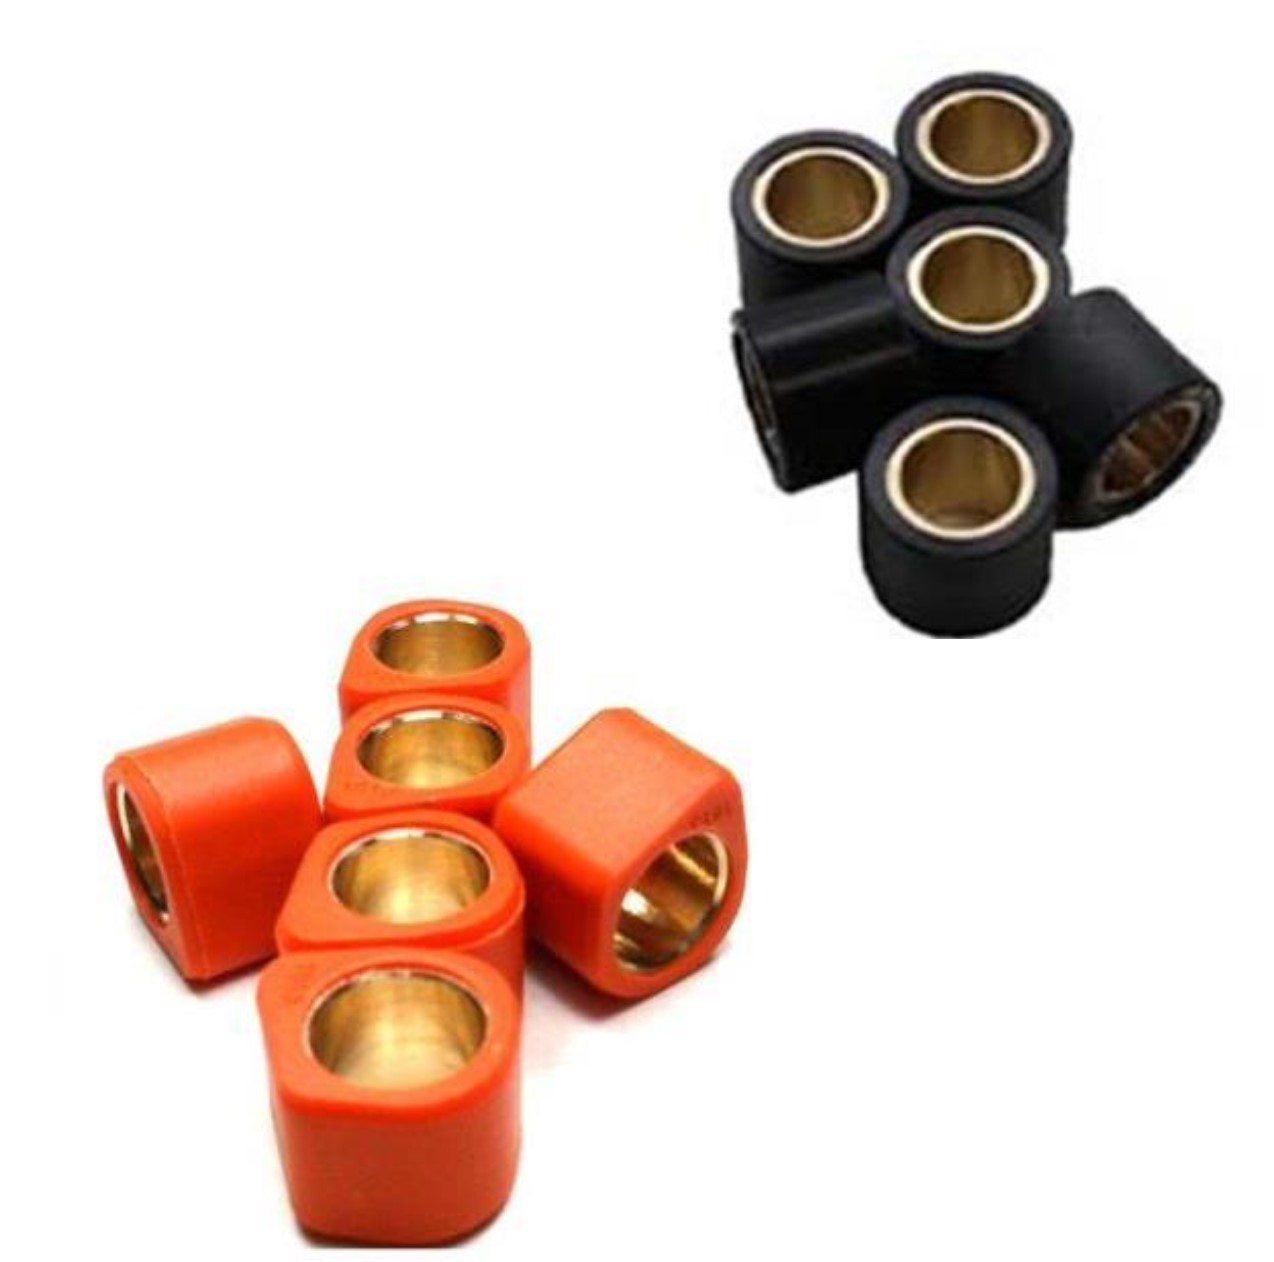 Clutch Rollers-Sliders 4 Stroke Engines All Size Rollers-Sliders